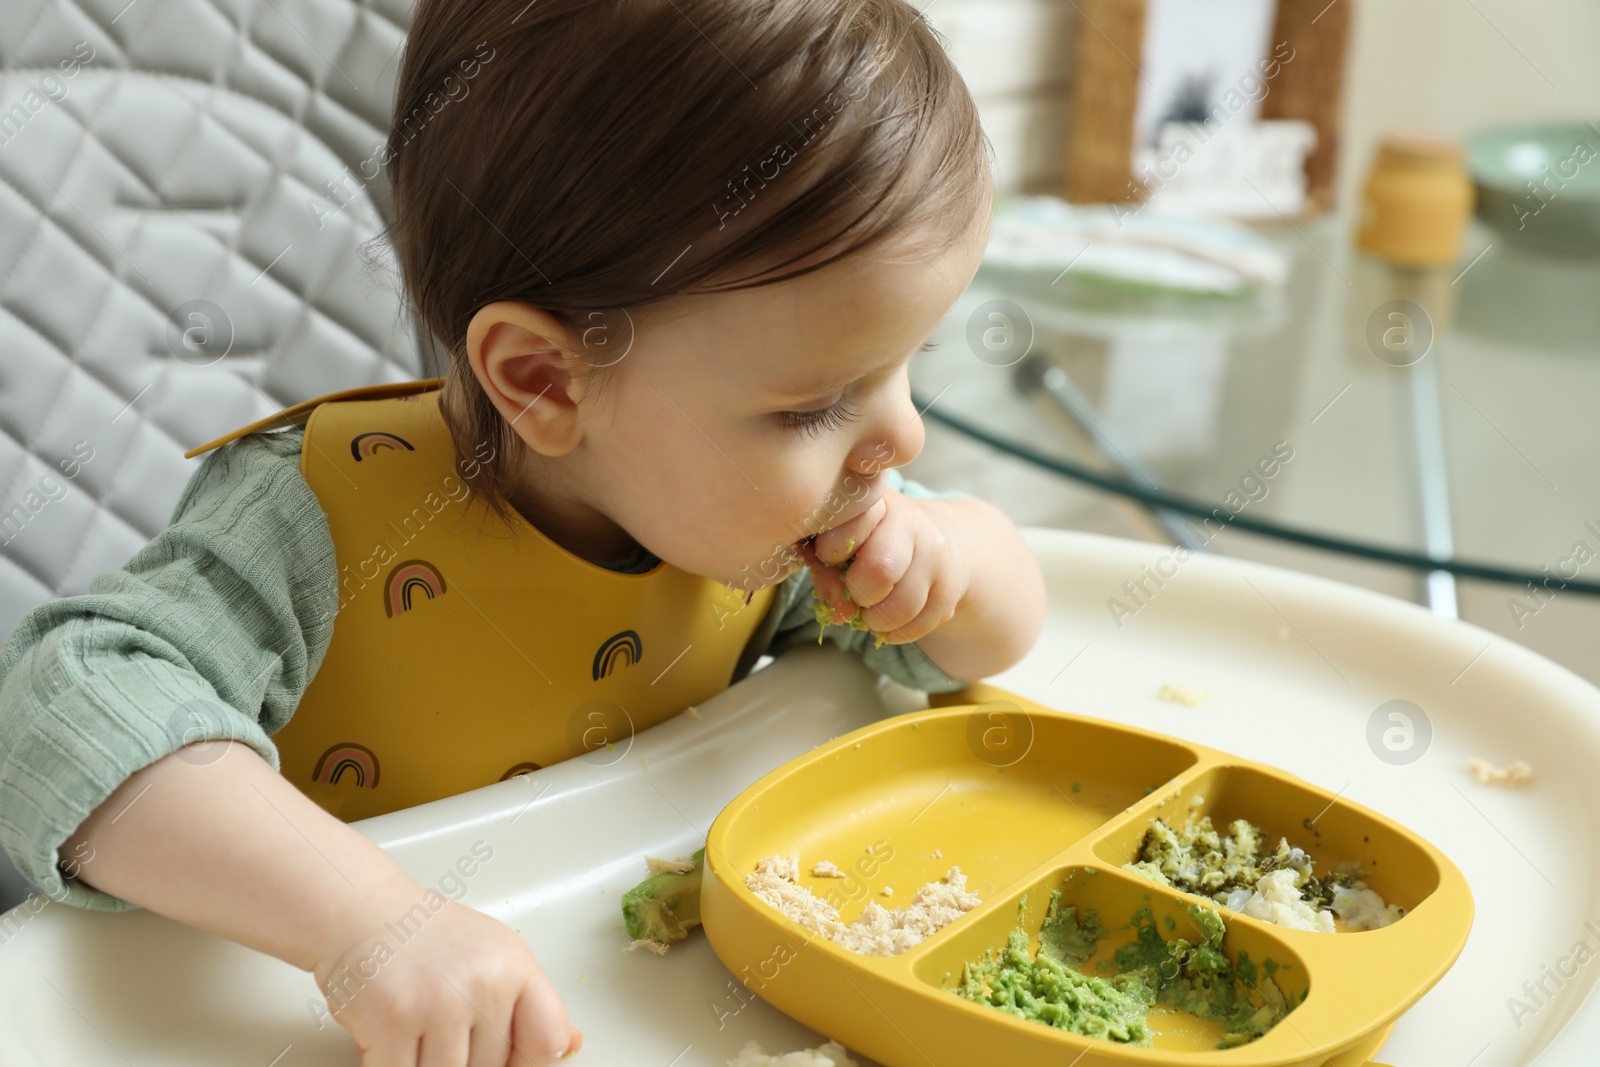 Photo of Cute little baby eating healthy food in high chair indoors